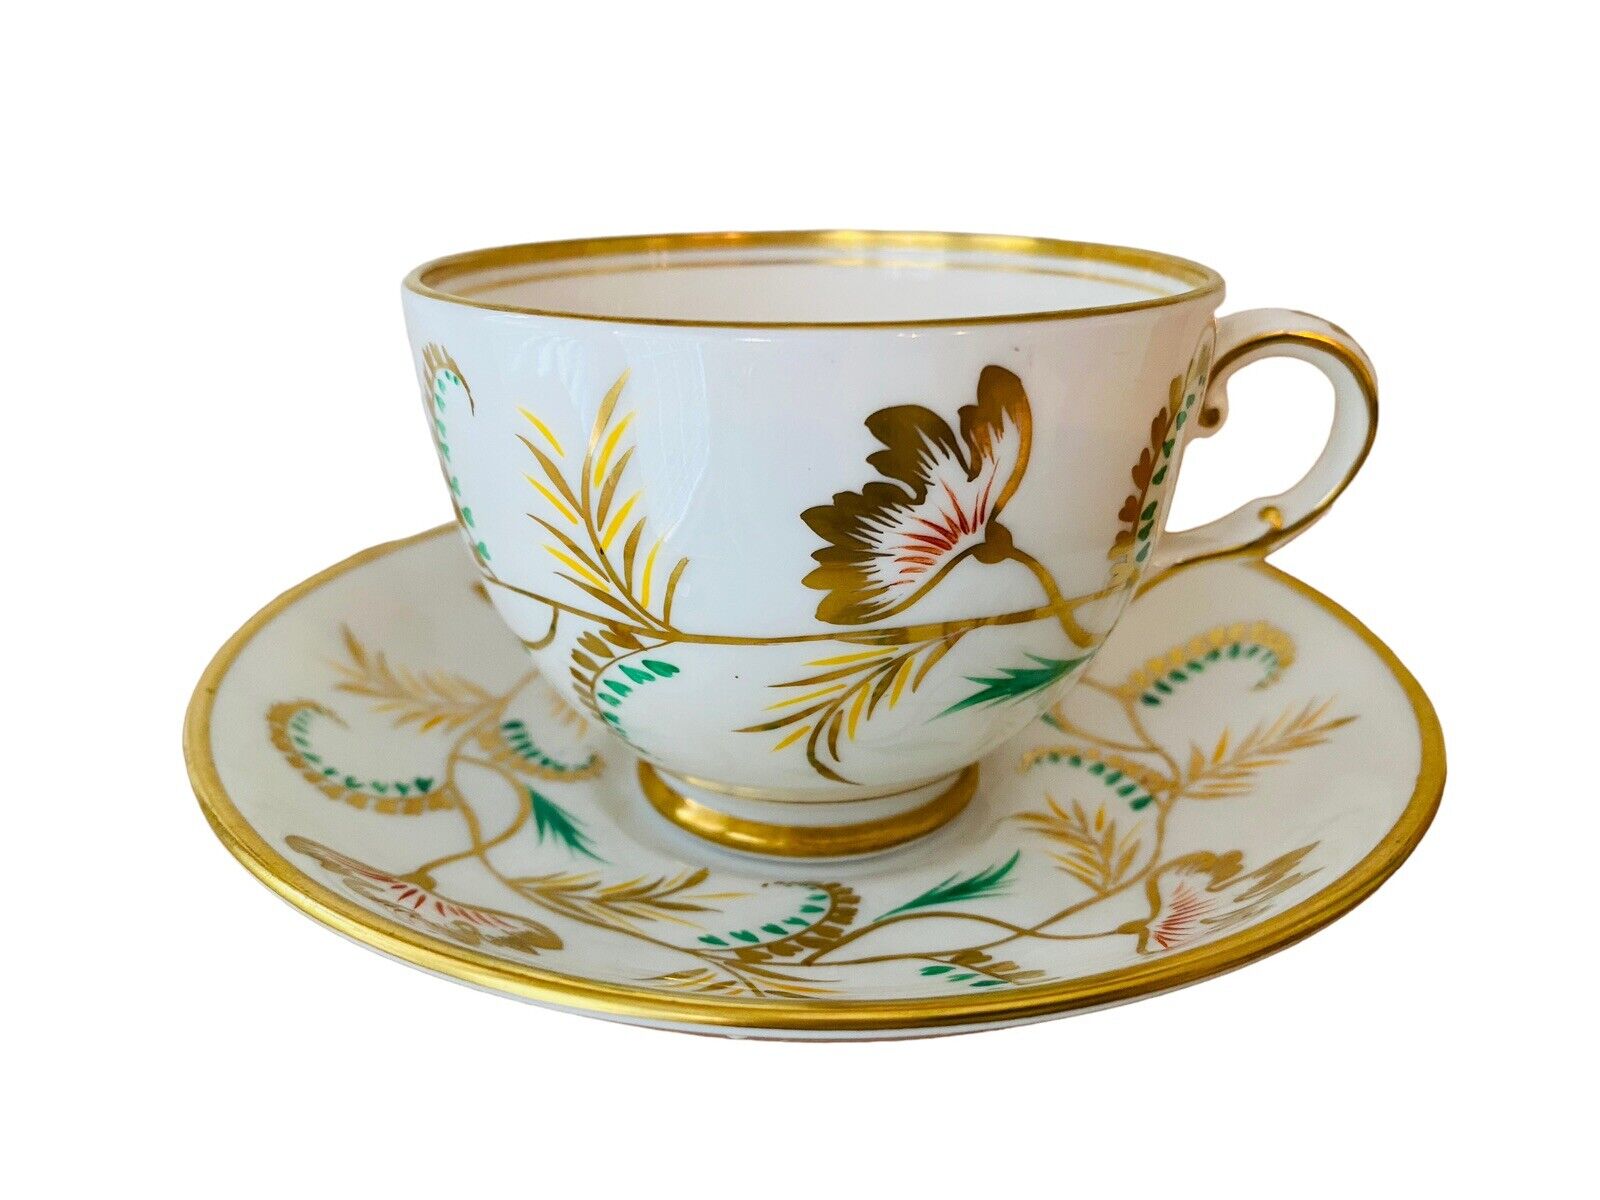 Royal Chelsea Teacup And Saucer English Bone China Floral Gold Trim 667A